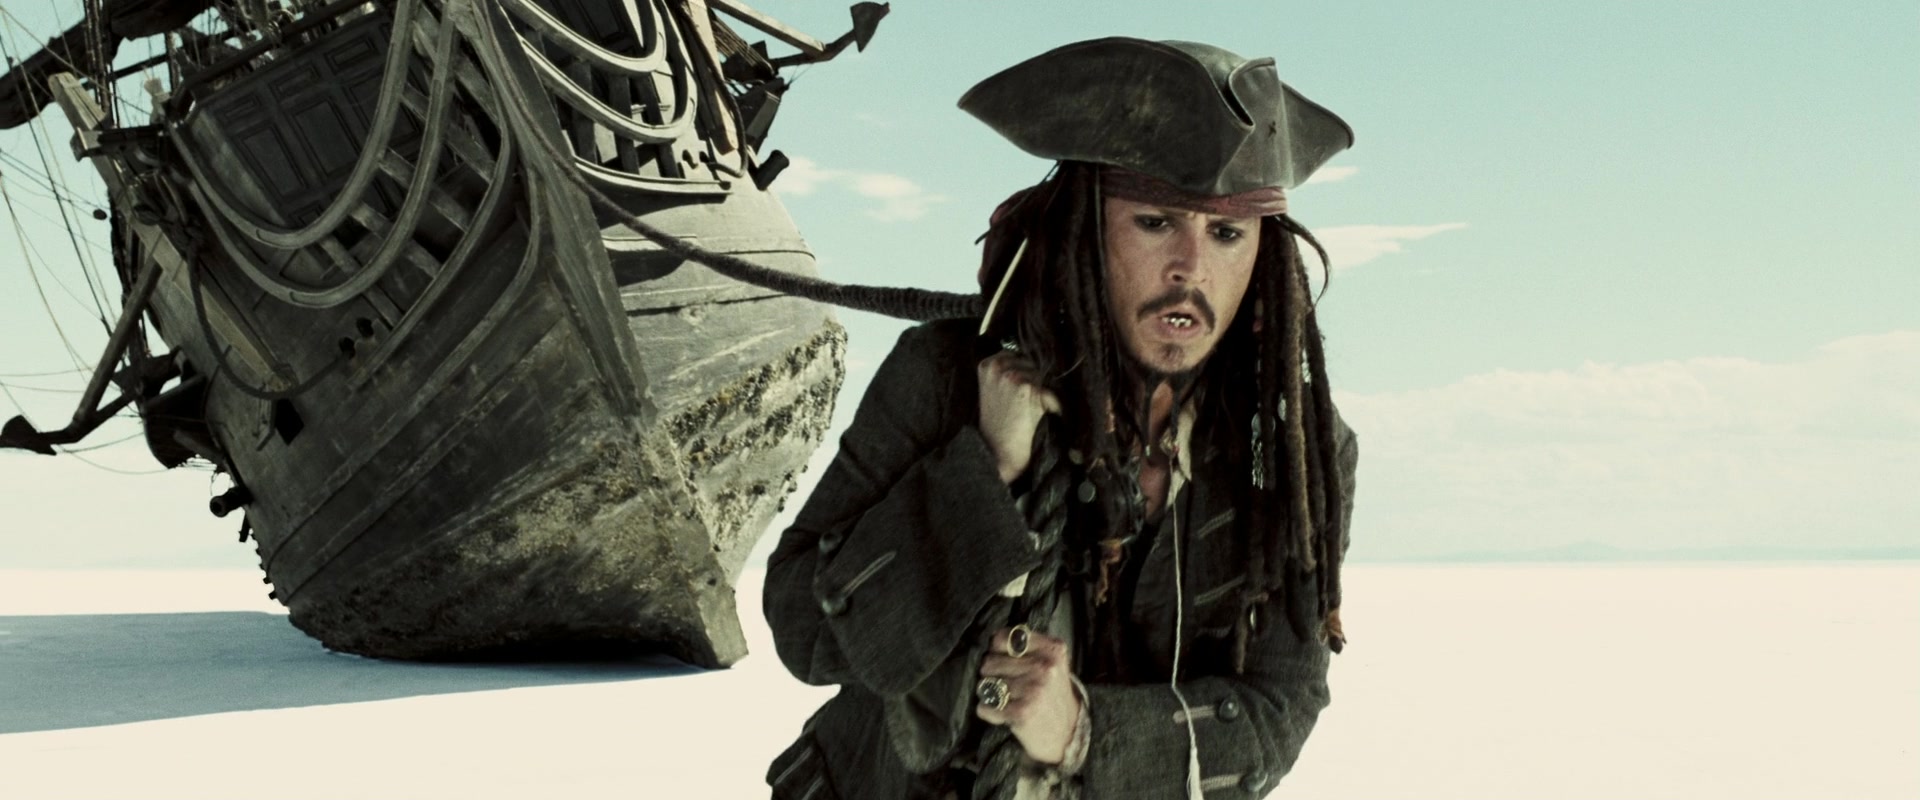 Captain Jack Sparrow (Johnny Depp) pulling his ship in Pirates of the Caribbean: At World's End (2007)